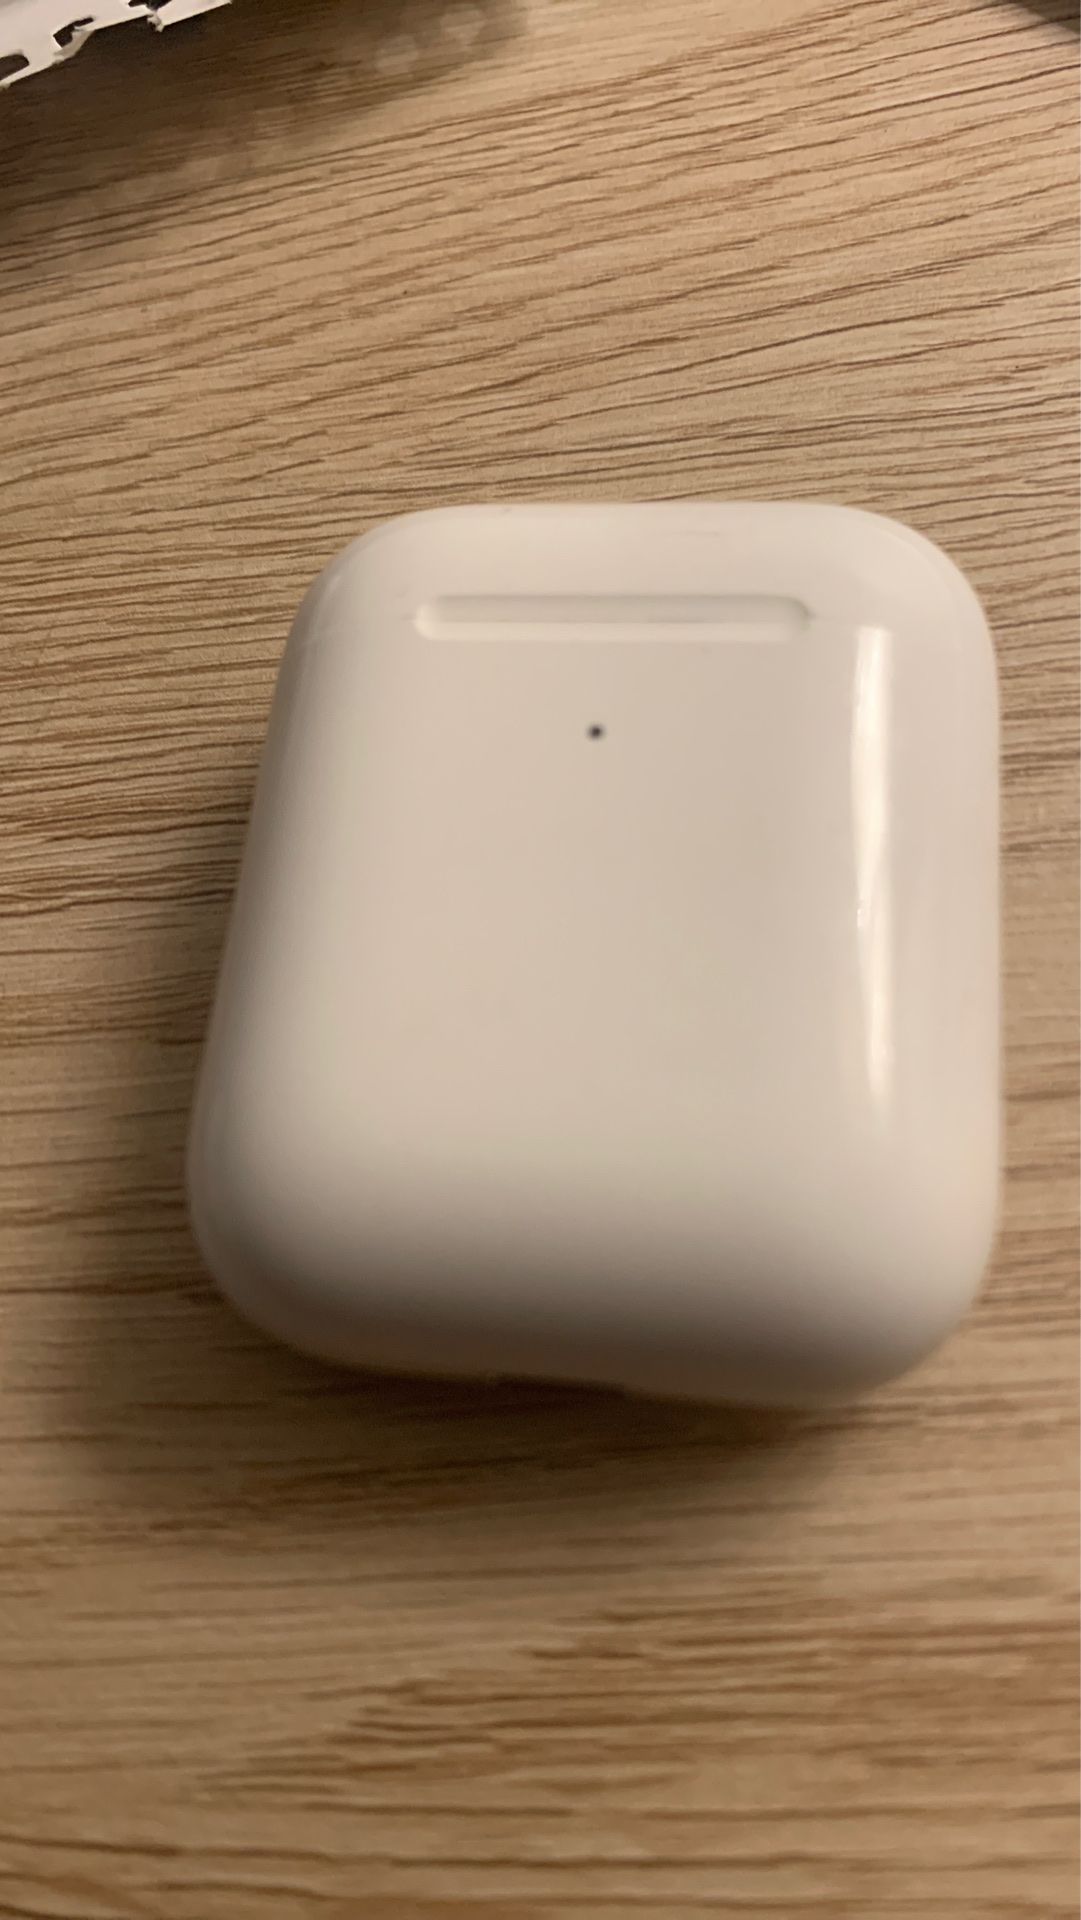 Apple AirPods charger casing serious 2 wireless charging